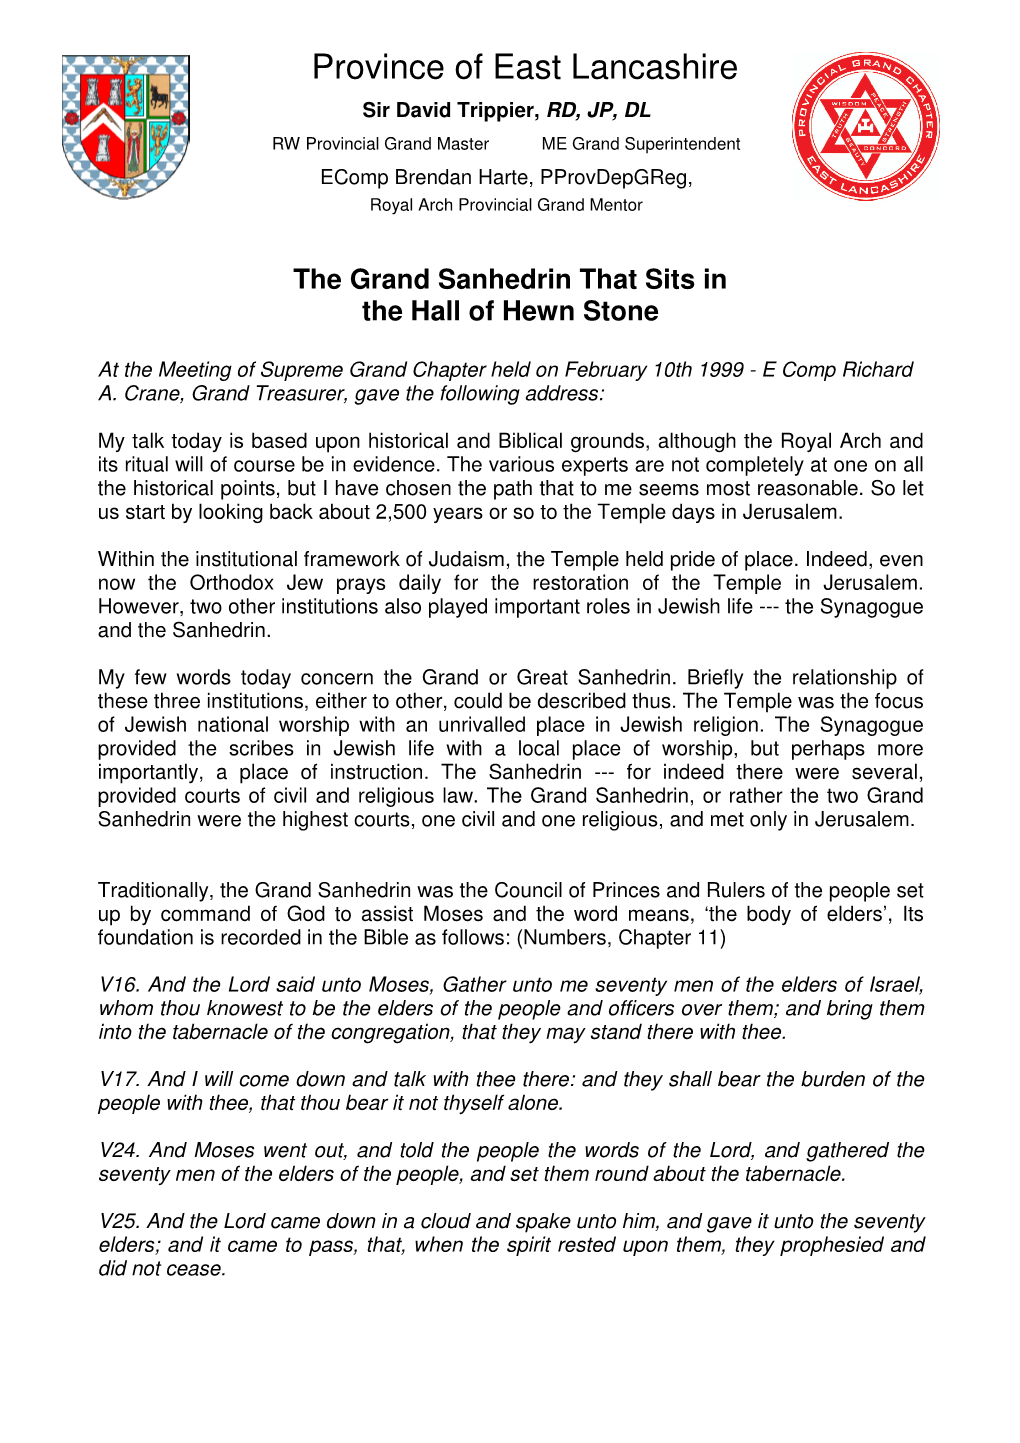 The Grand Sanhedrin That Sits in the Hall of Hewn Stone